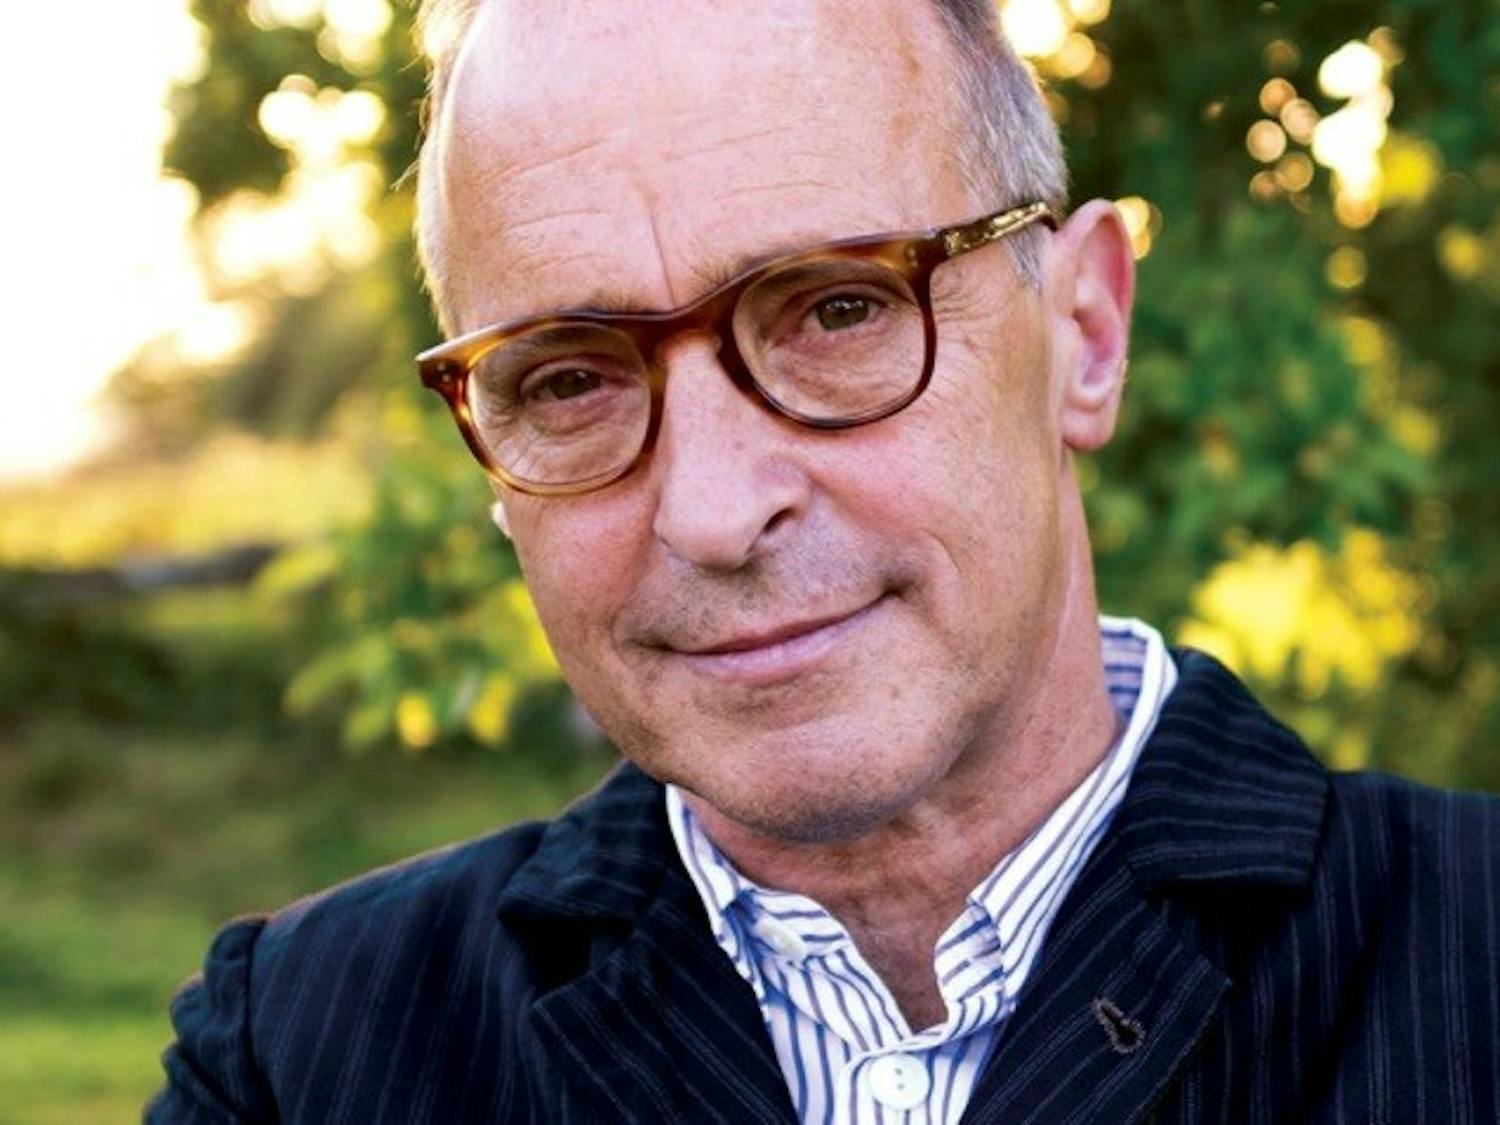 David Sedaris performed at the Overture Center&nbsp;as part of their "Celebrity Series."